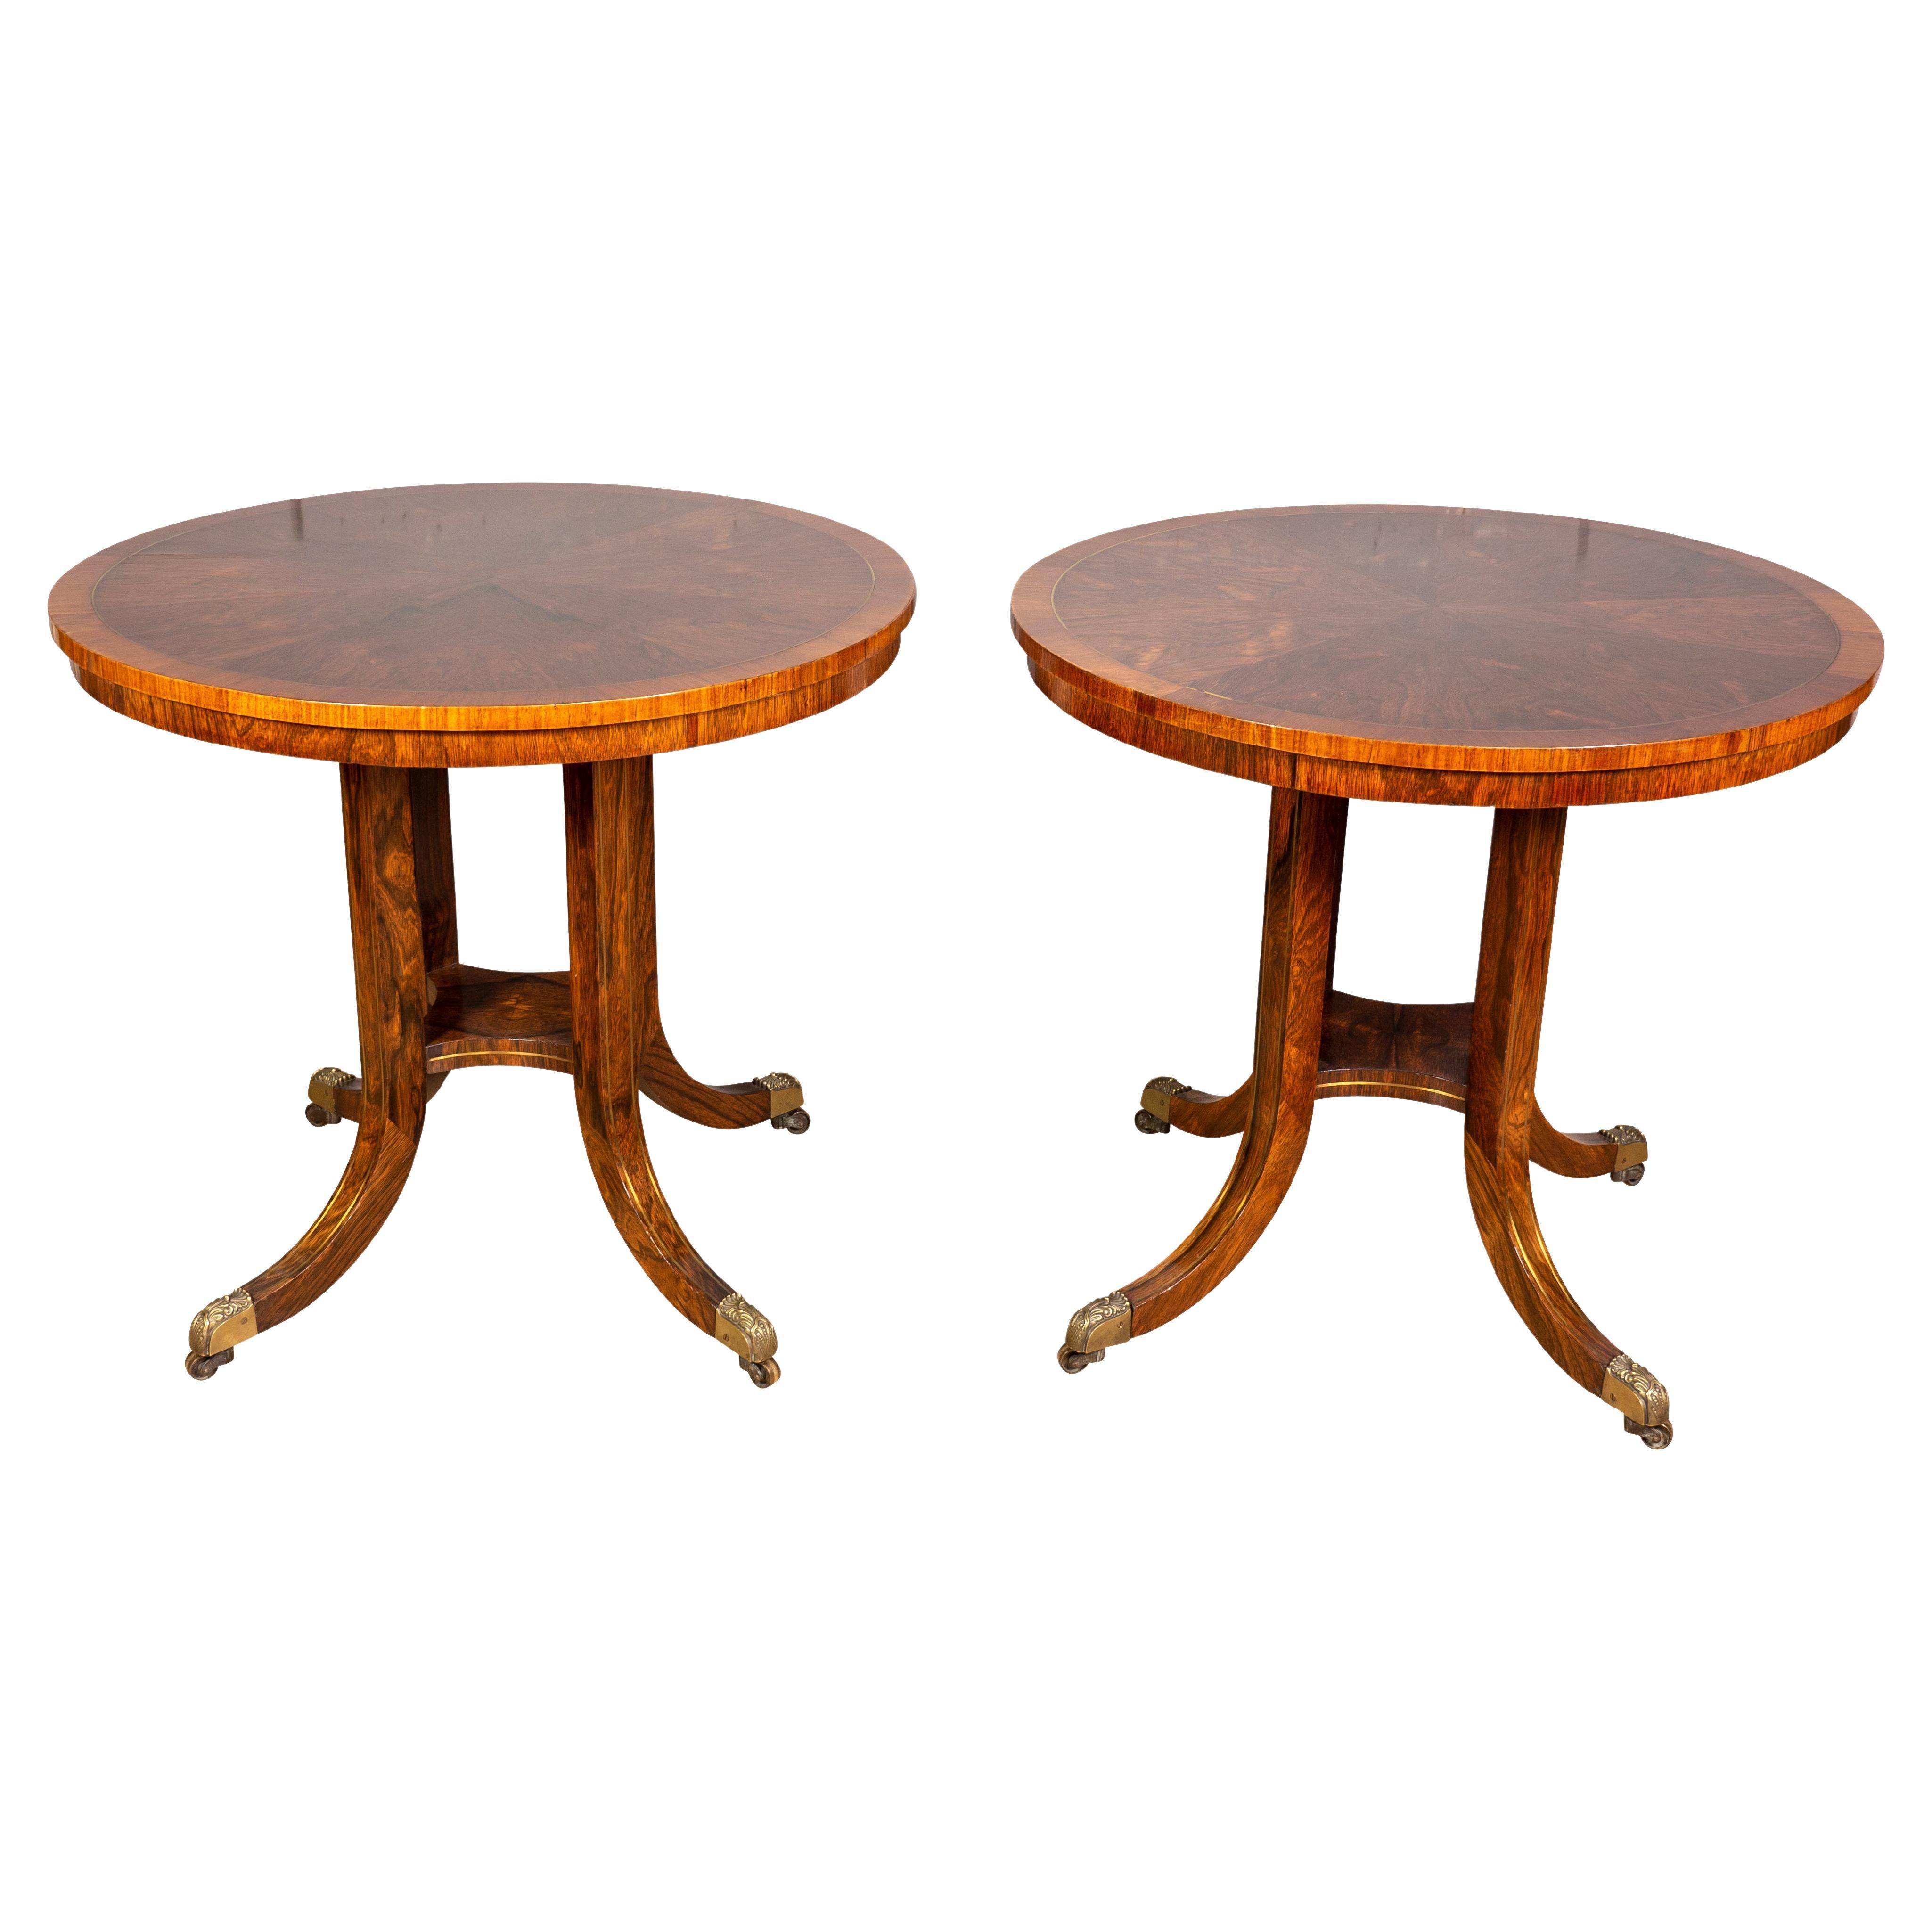 Pair of Regency Style Rosewood and Brass Inlaid Tables